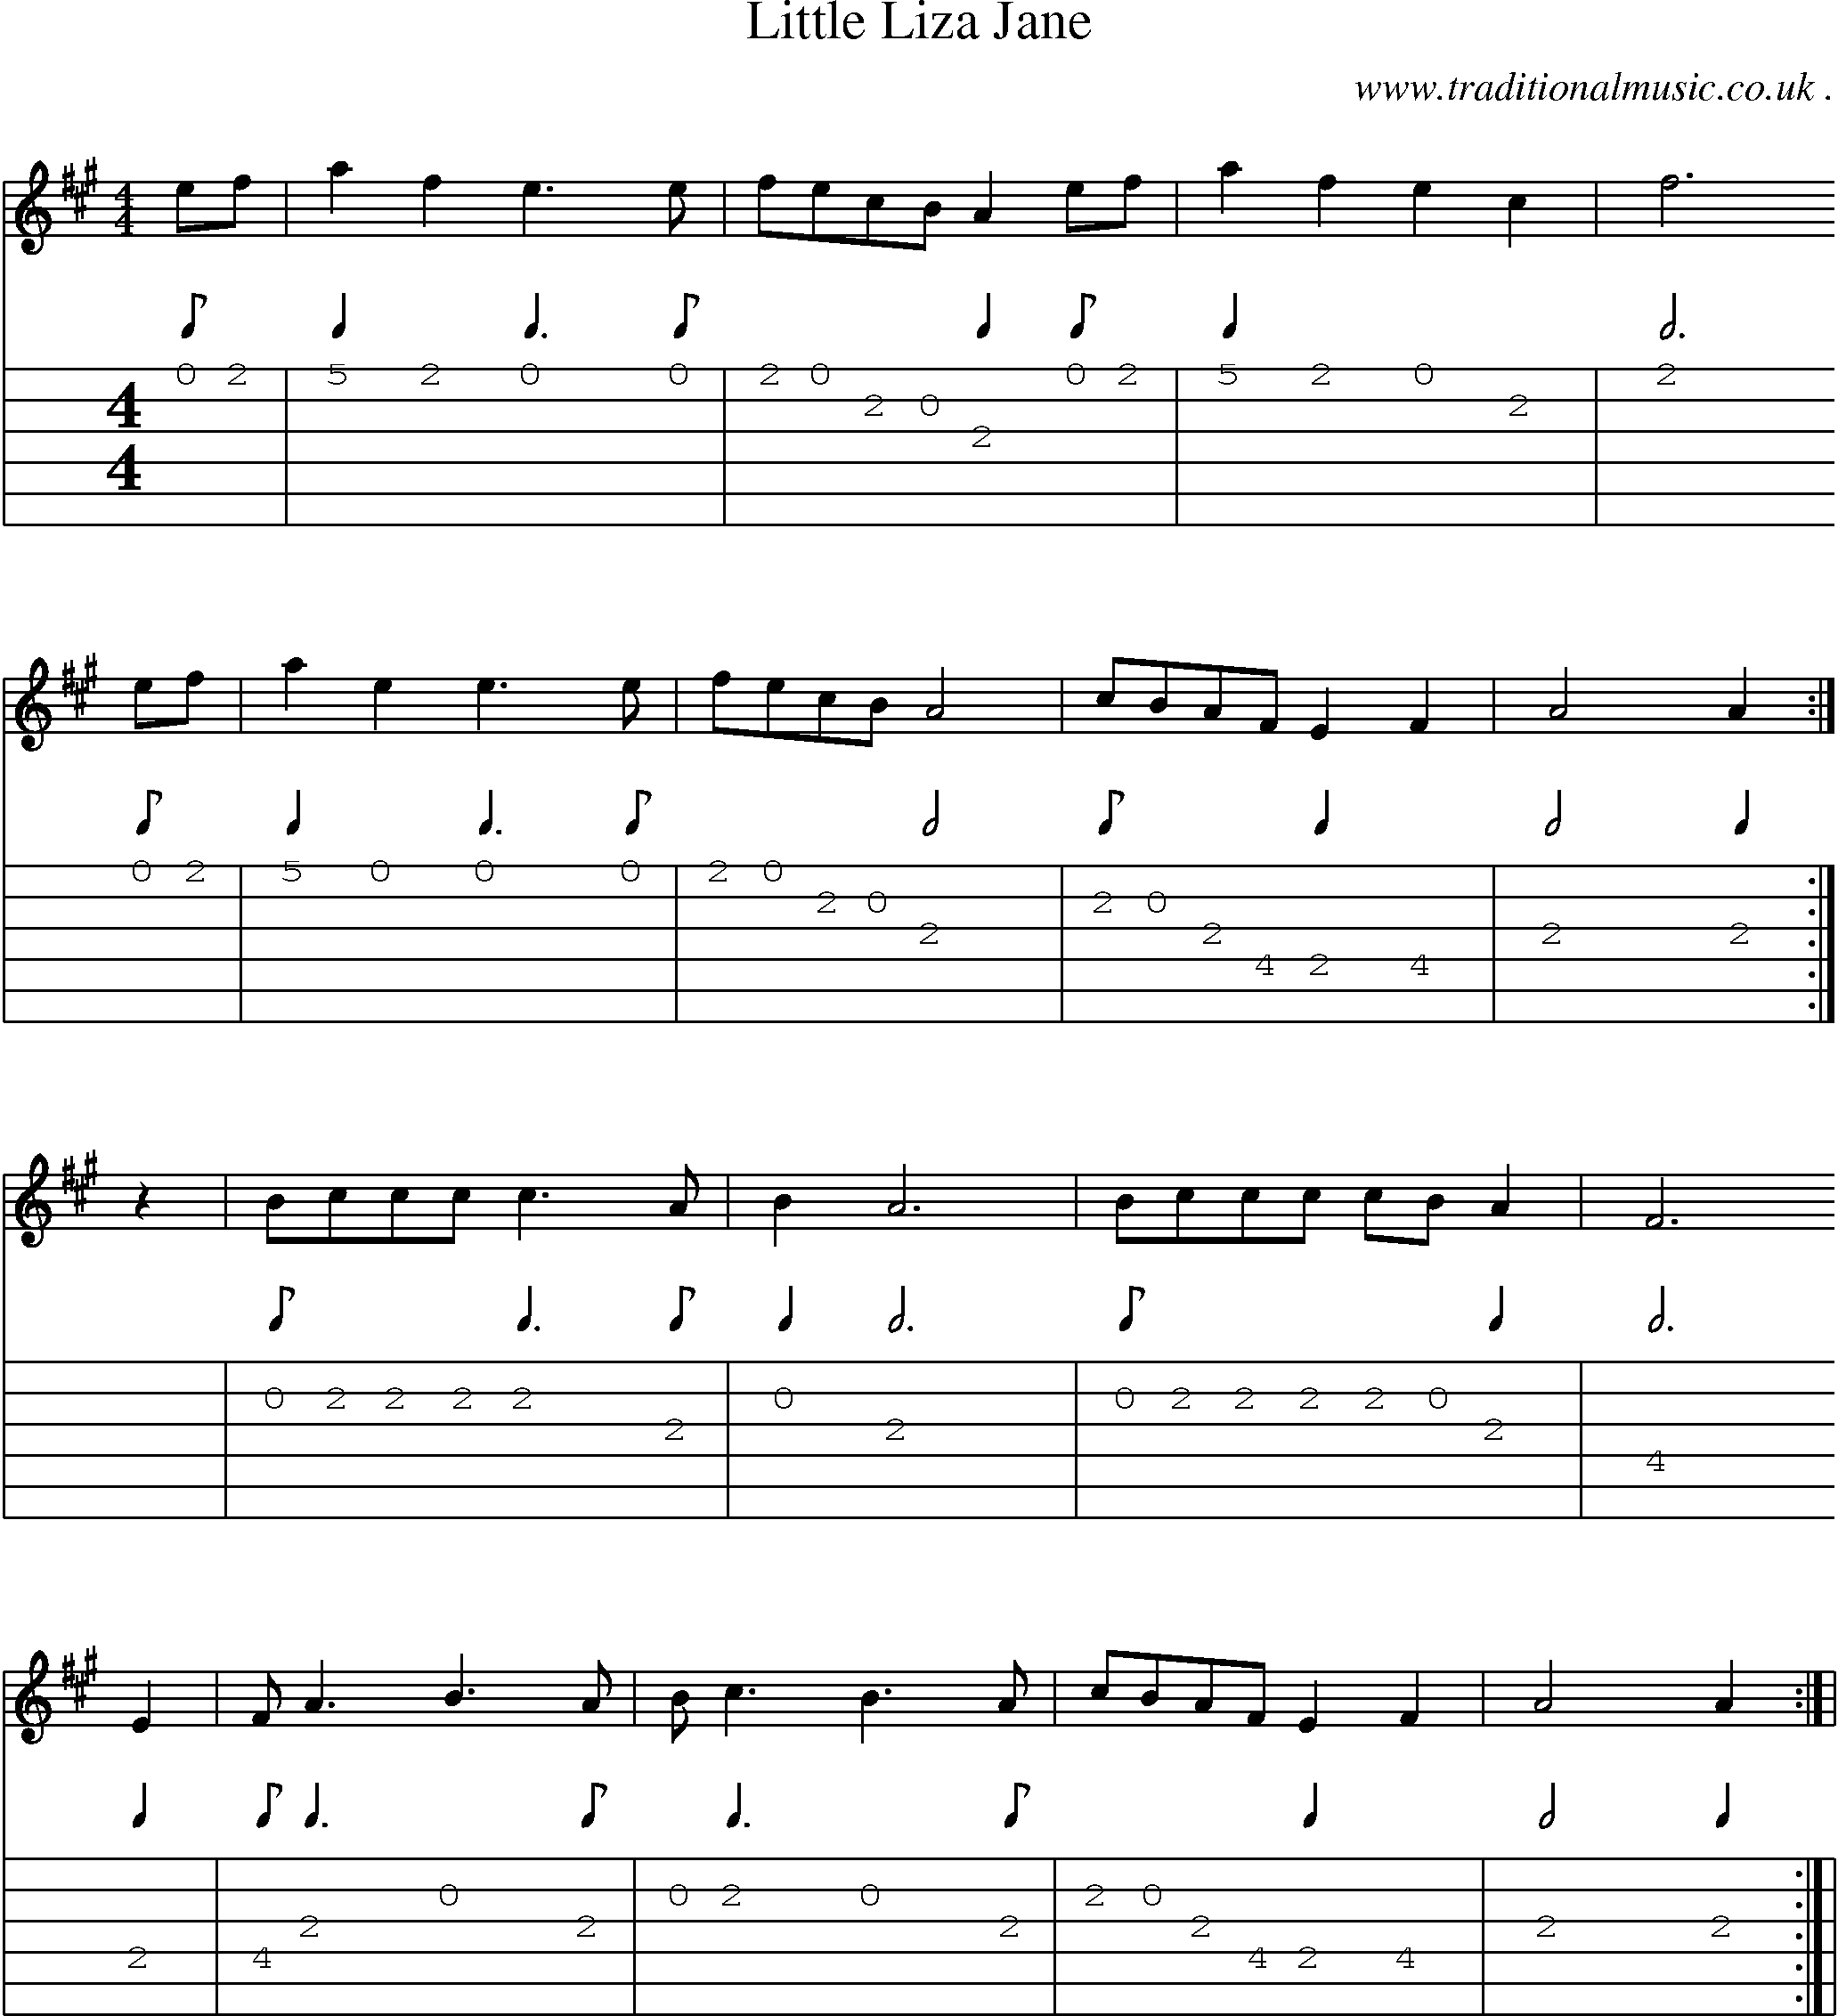 Music Score and Guitar Tabs for Little Liza Jane